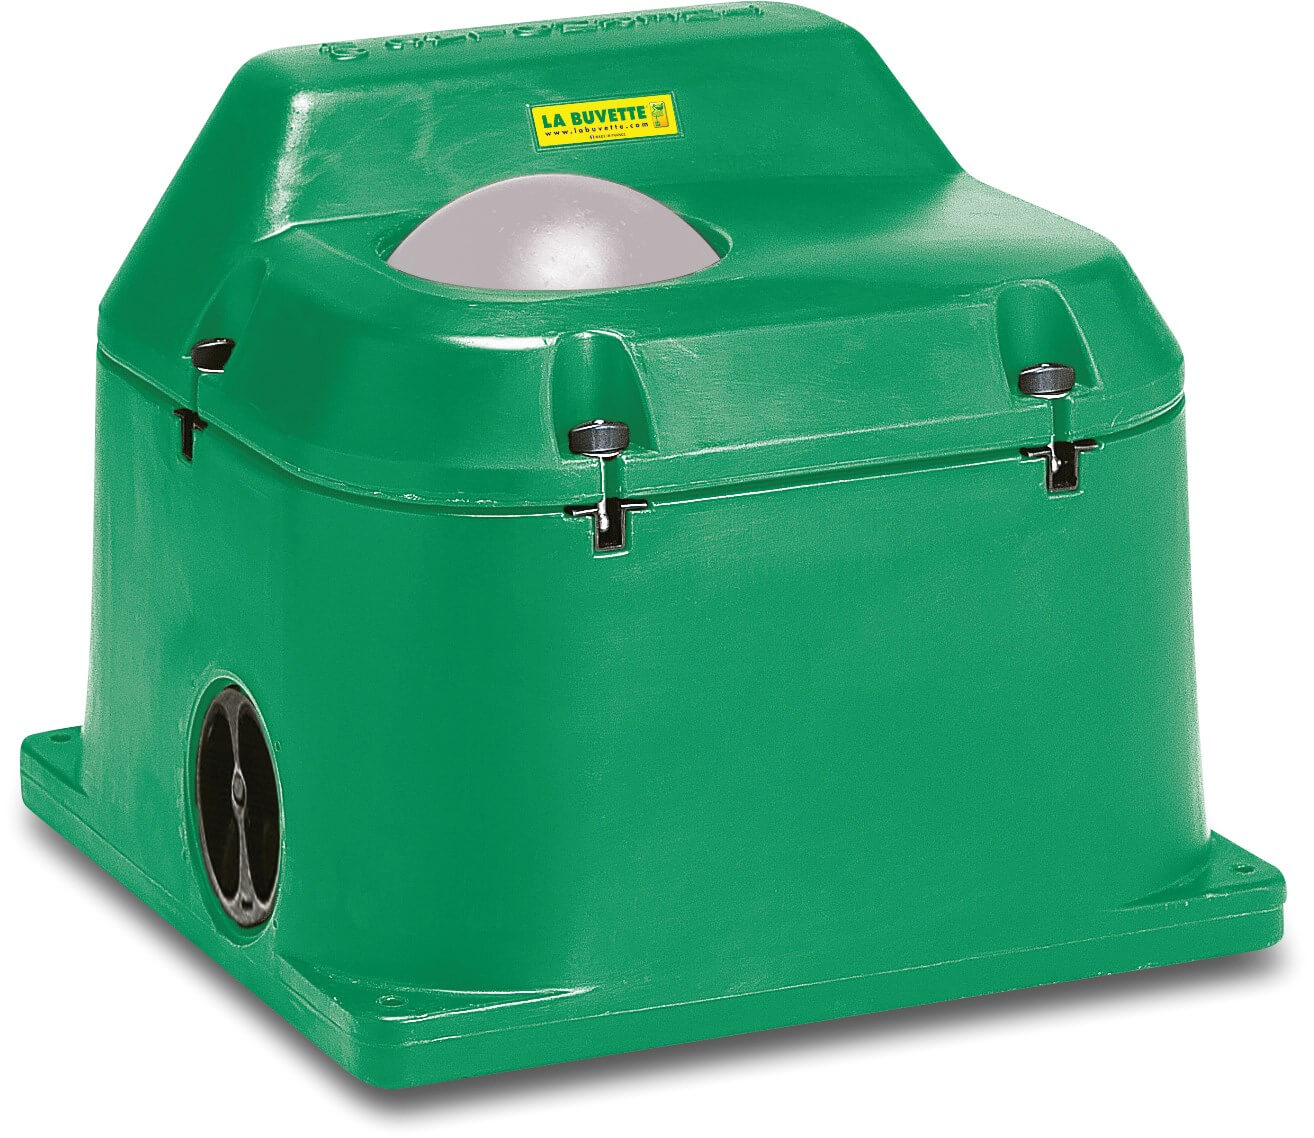 La Buvette Frostfree waterer with 1 shut-off bal isolated, type Thermolac